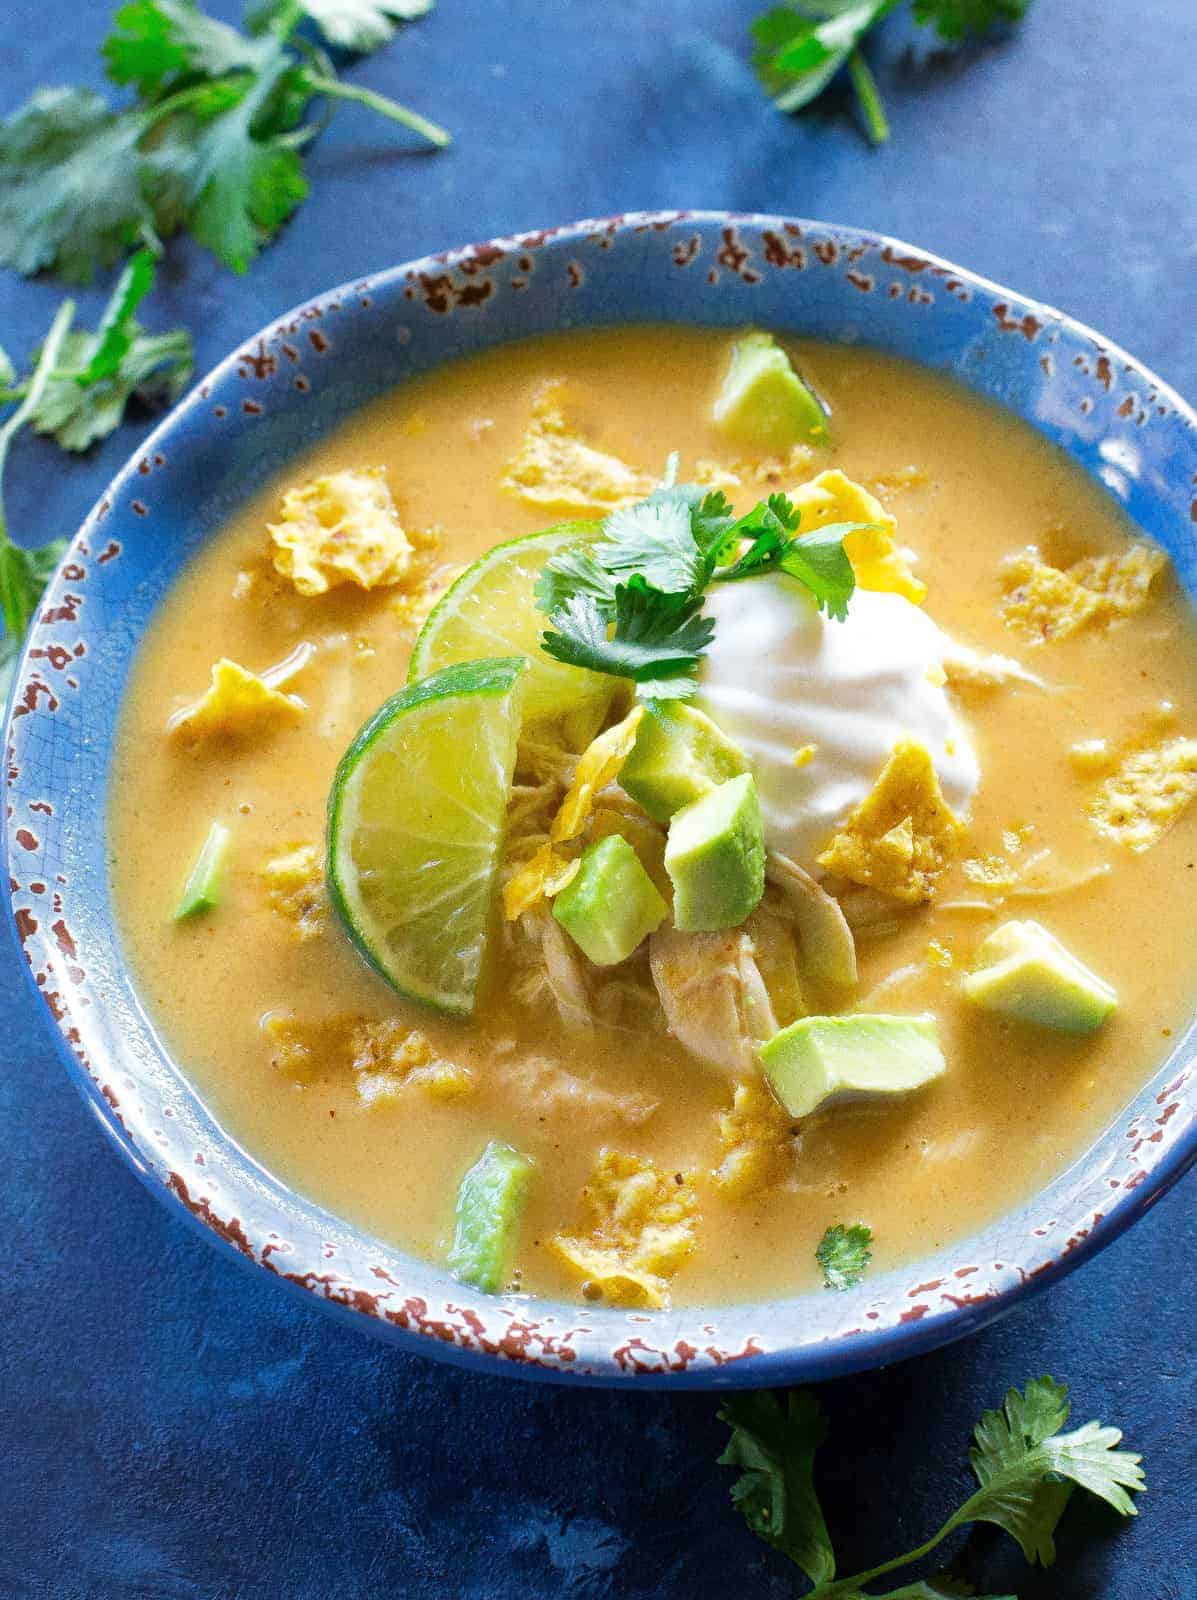 https://www.the-girl-who-ate-everything.com/wp-content/uploads/2012/11/chicken-tortilla-soup-2.jpg